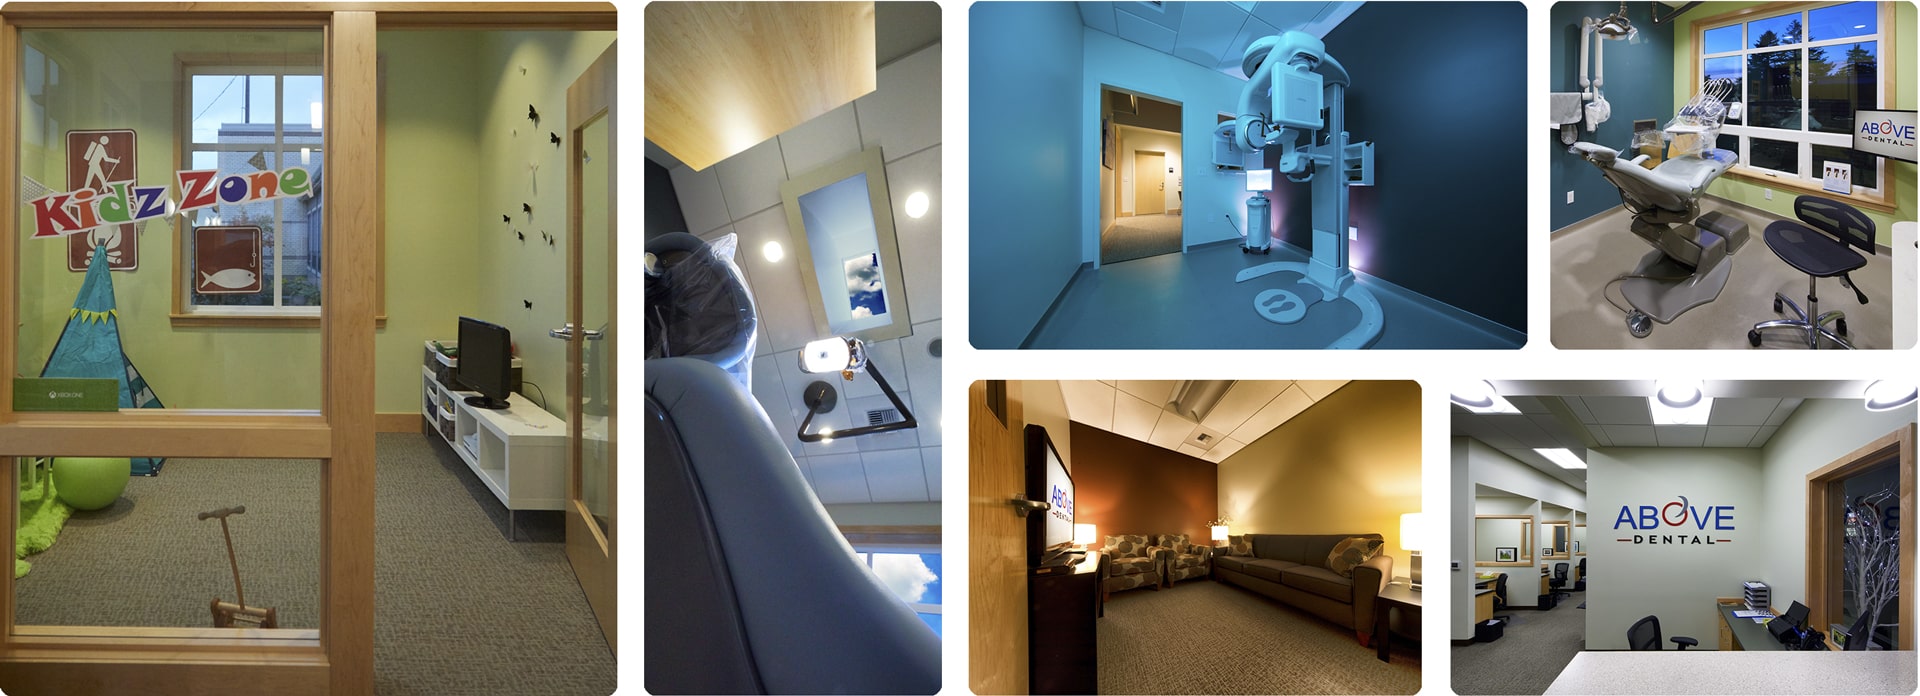 A collage of the different rooms in the Above Dental dental office